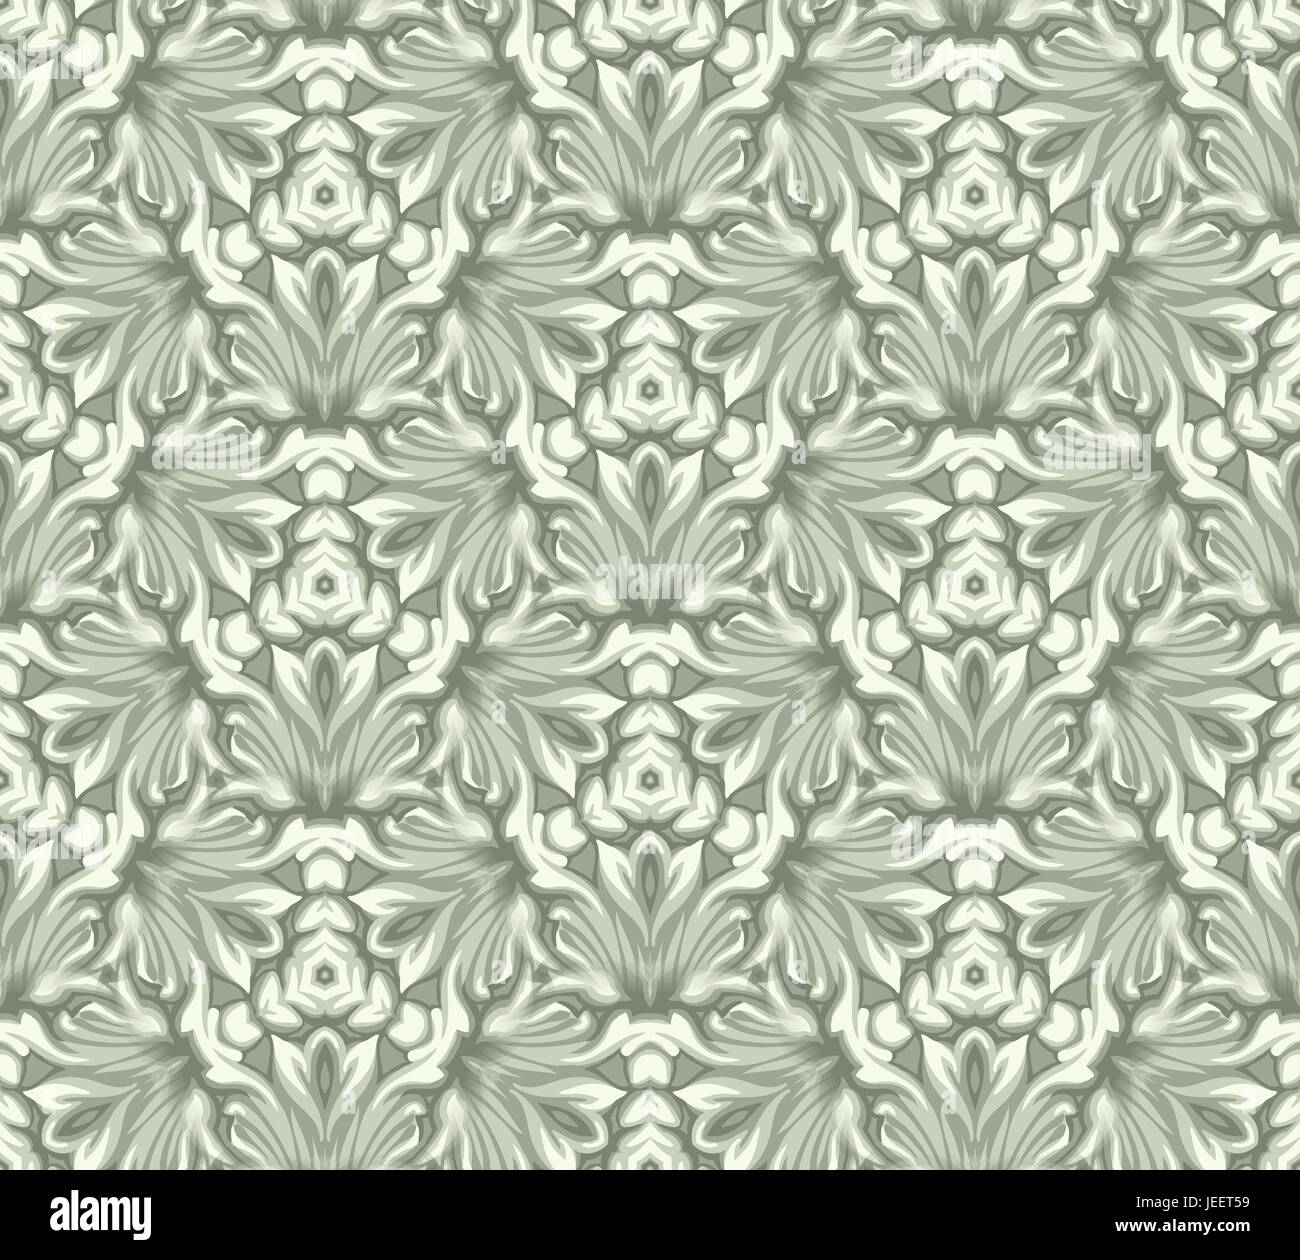 Hand drawn monochrome textured floral background. Seamless wallpaper  pattern. Great for fabric and drapery prints Stock Photo - Alamy